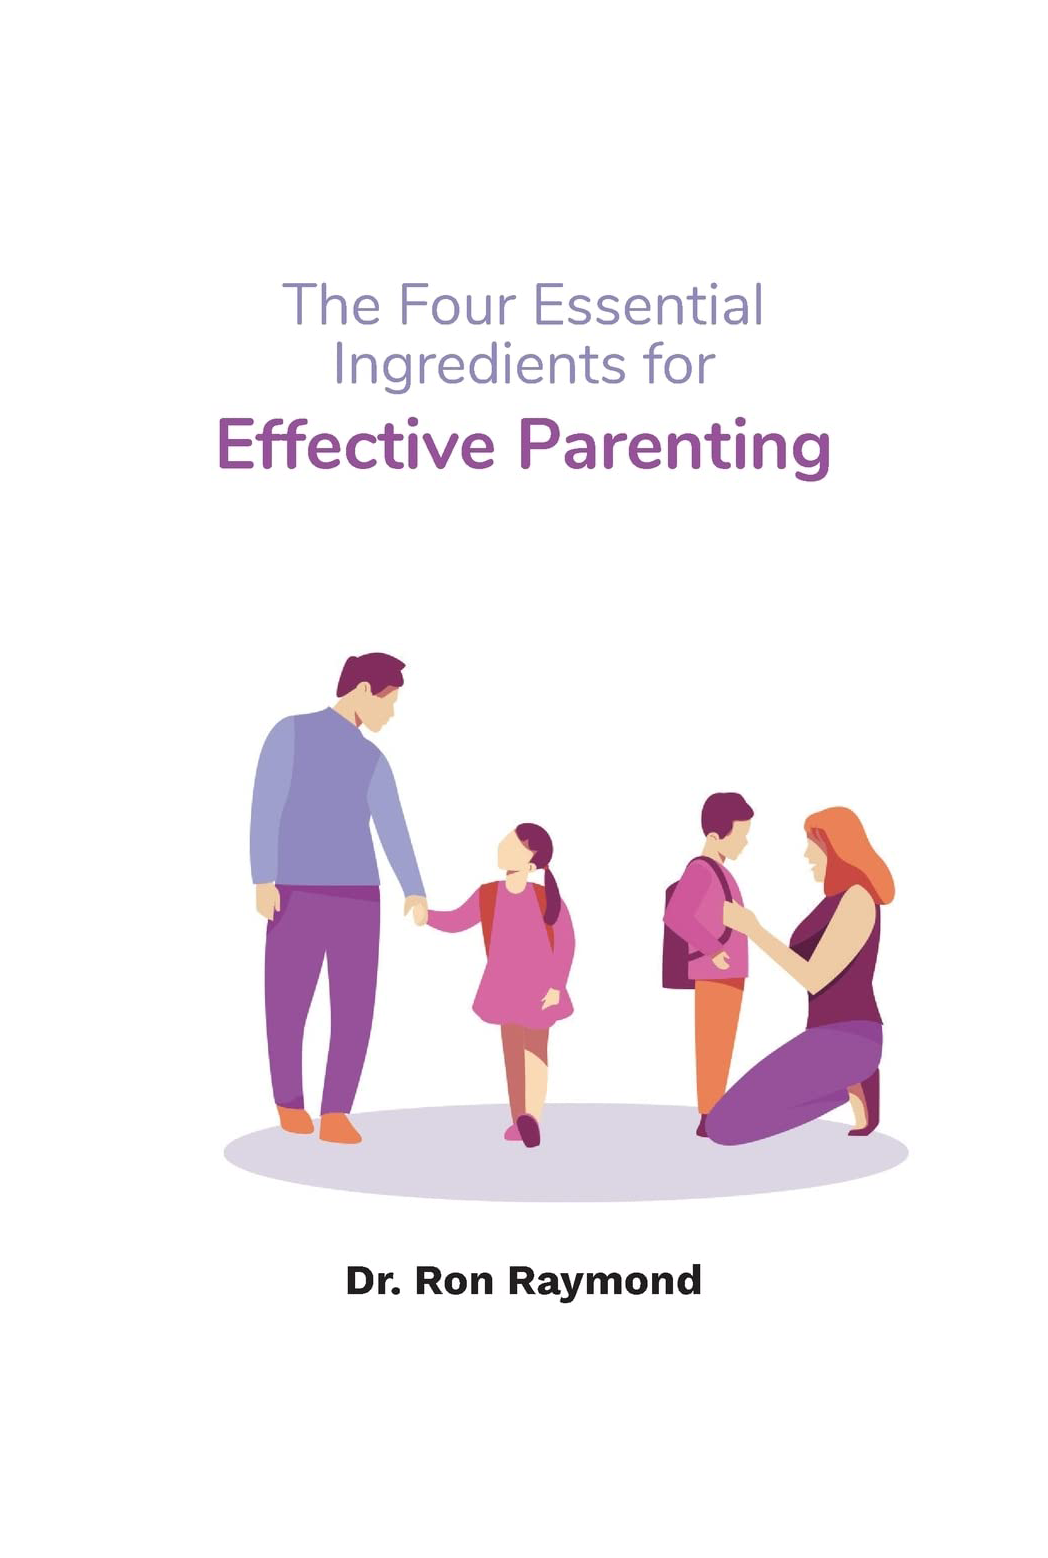 The Four Essential Ingredients for Effective Parenting